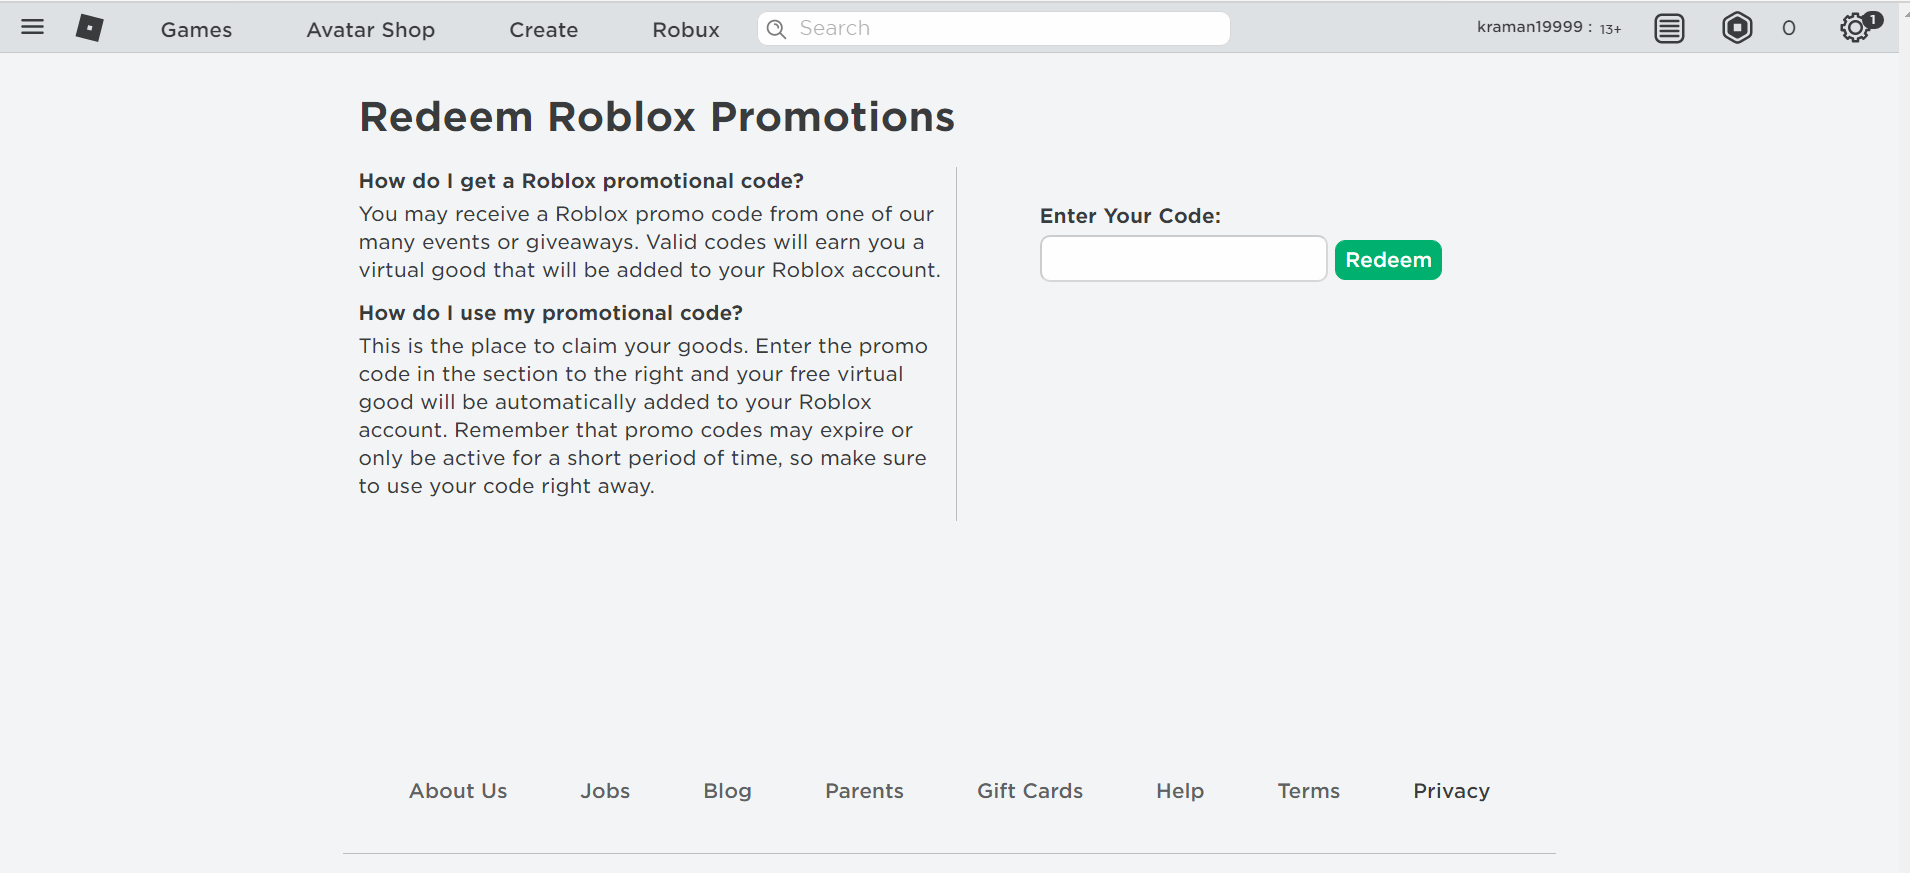 Please enter the code you received. Roblox Promo code. Redeem Roblox codes. Redeem Roblox promotions. Redeem Roblox promocodes.